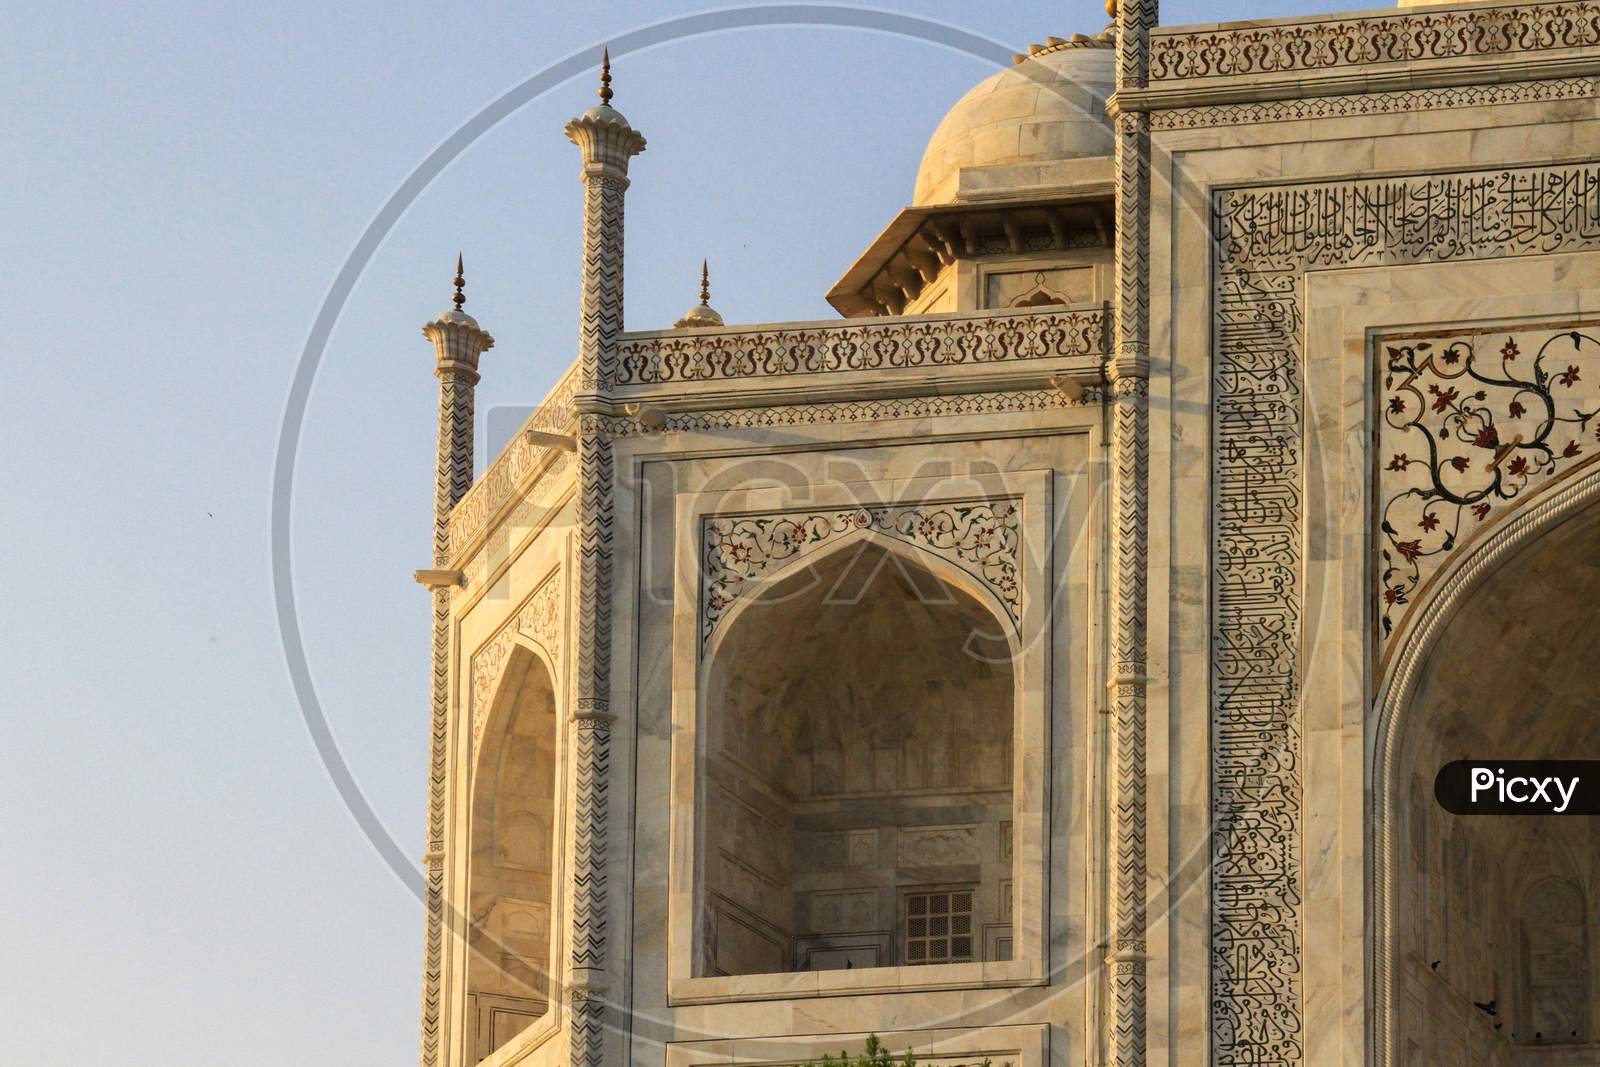 The Taj Mahal Is An Ivory-White Marble Mausoleum On The South Bank Of The Yamuna River In The Indian City Of Agra, Uttar Pradesh.